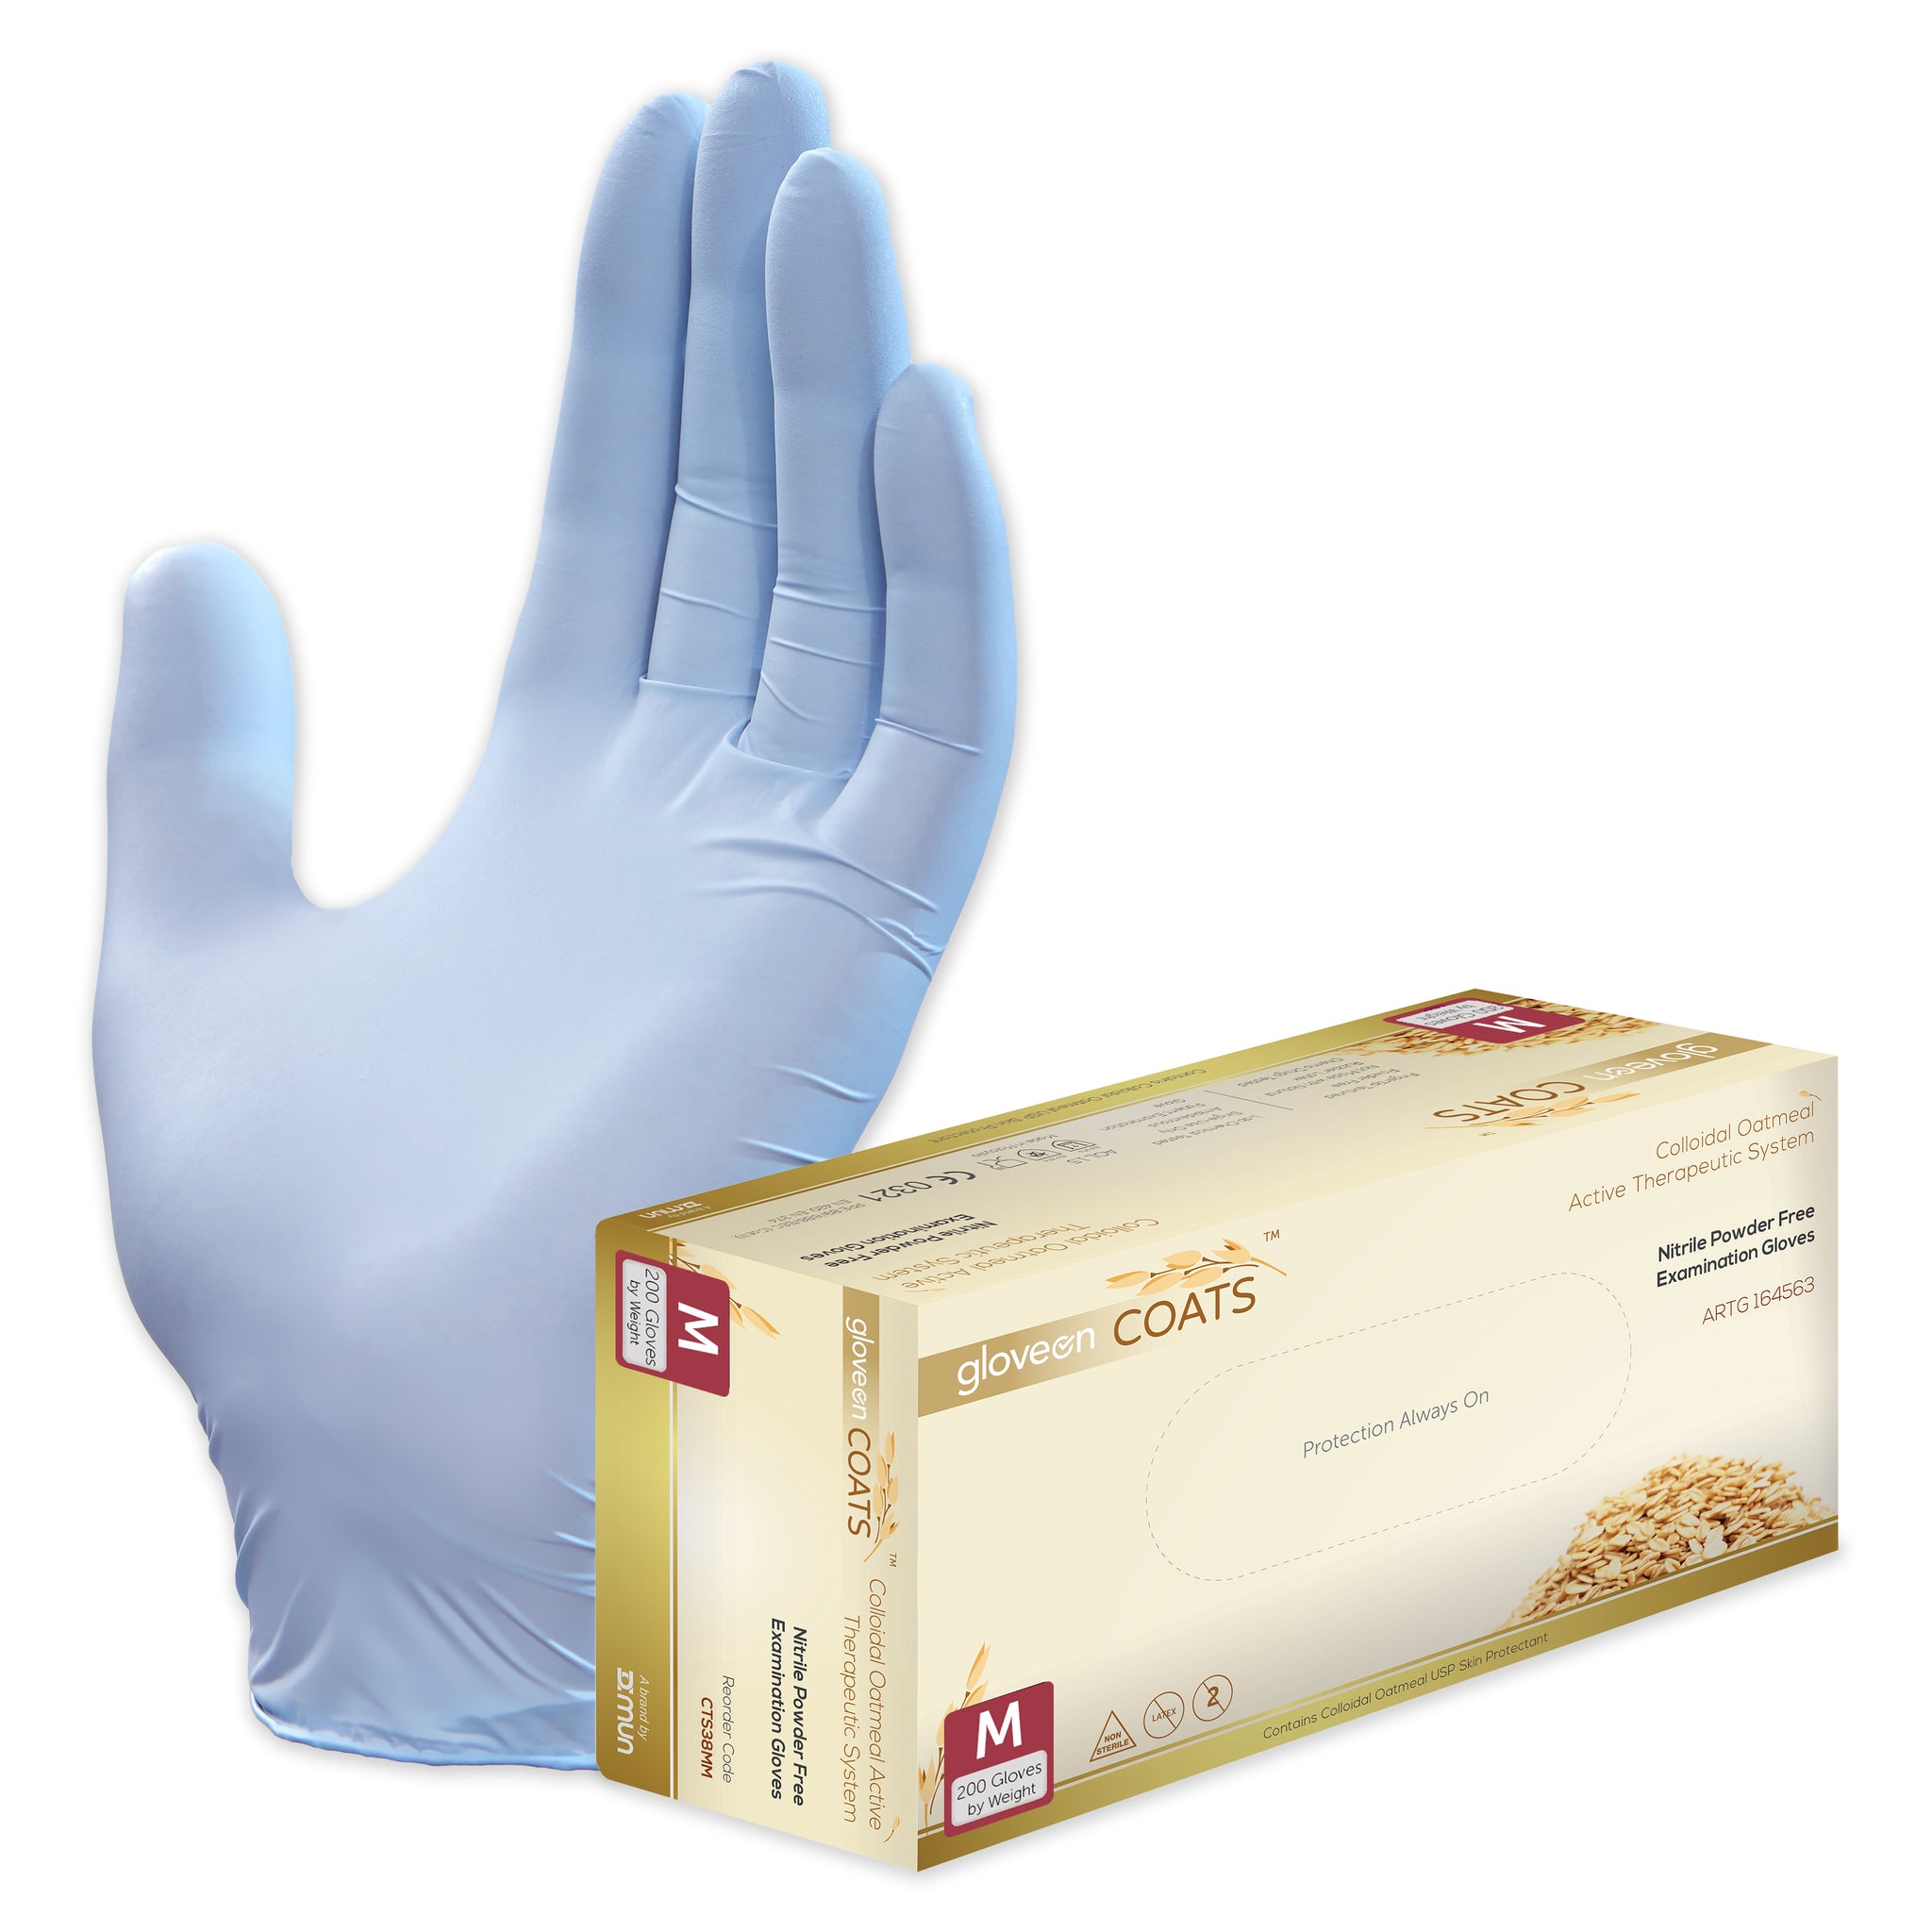 Nitrile Exam Gloves with Colloidal Oatmeal System, Powder Free, Non-Sterile, Fingertip Textured, Colloidal Oats Coated, Standard Cuff, Dawn Blue - Box of 200, M